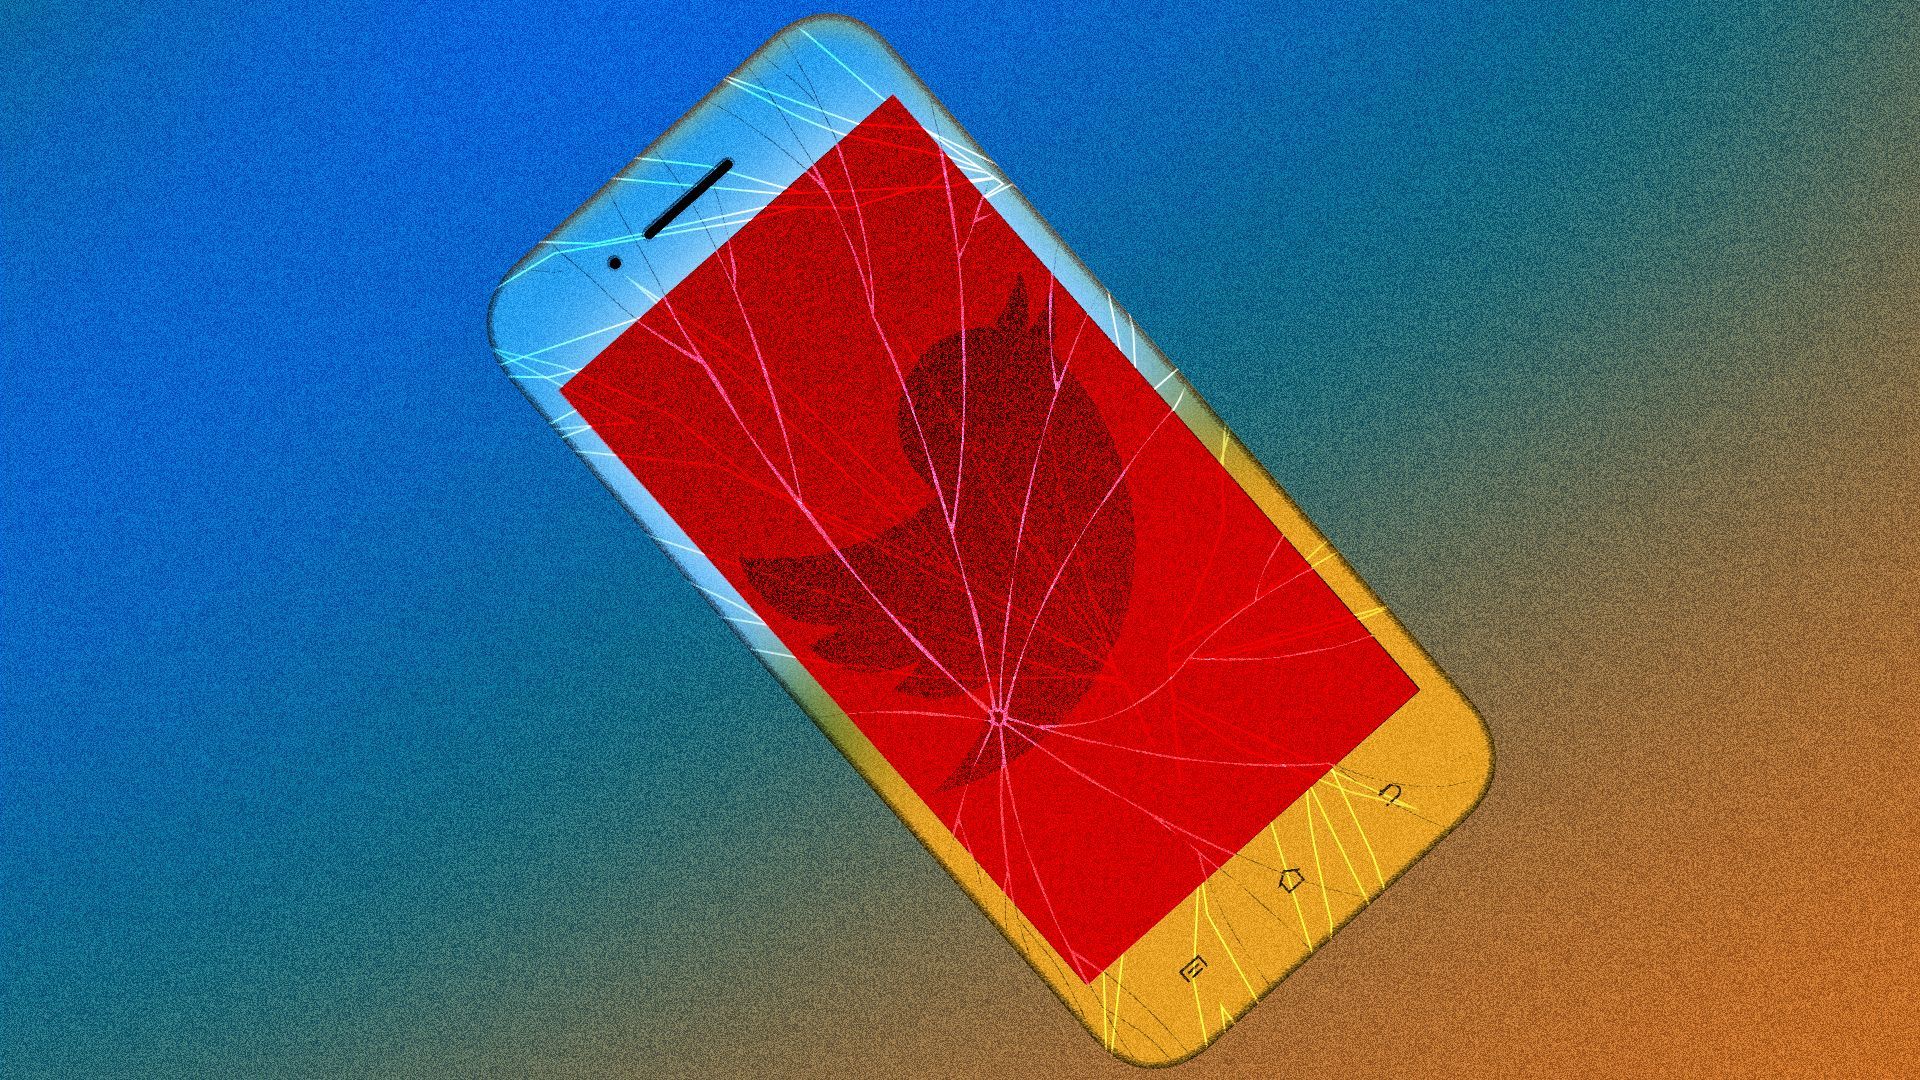 Illustration of a cracked cellphone with the twitter logo in the center